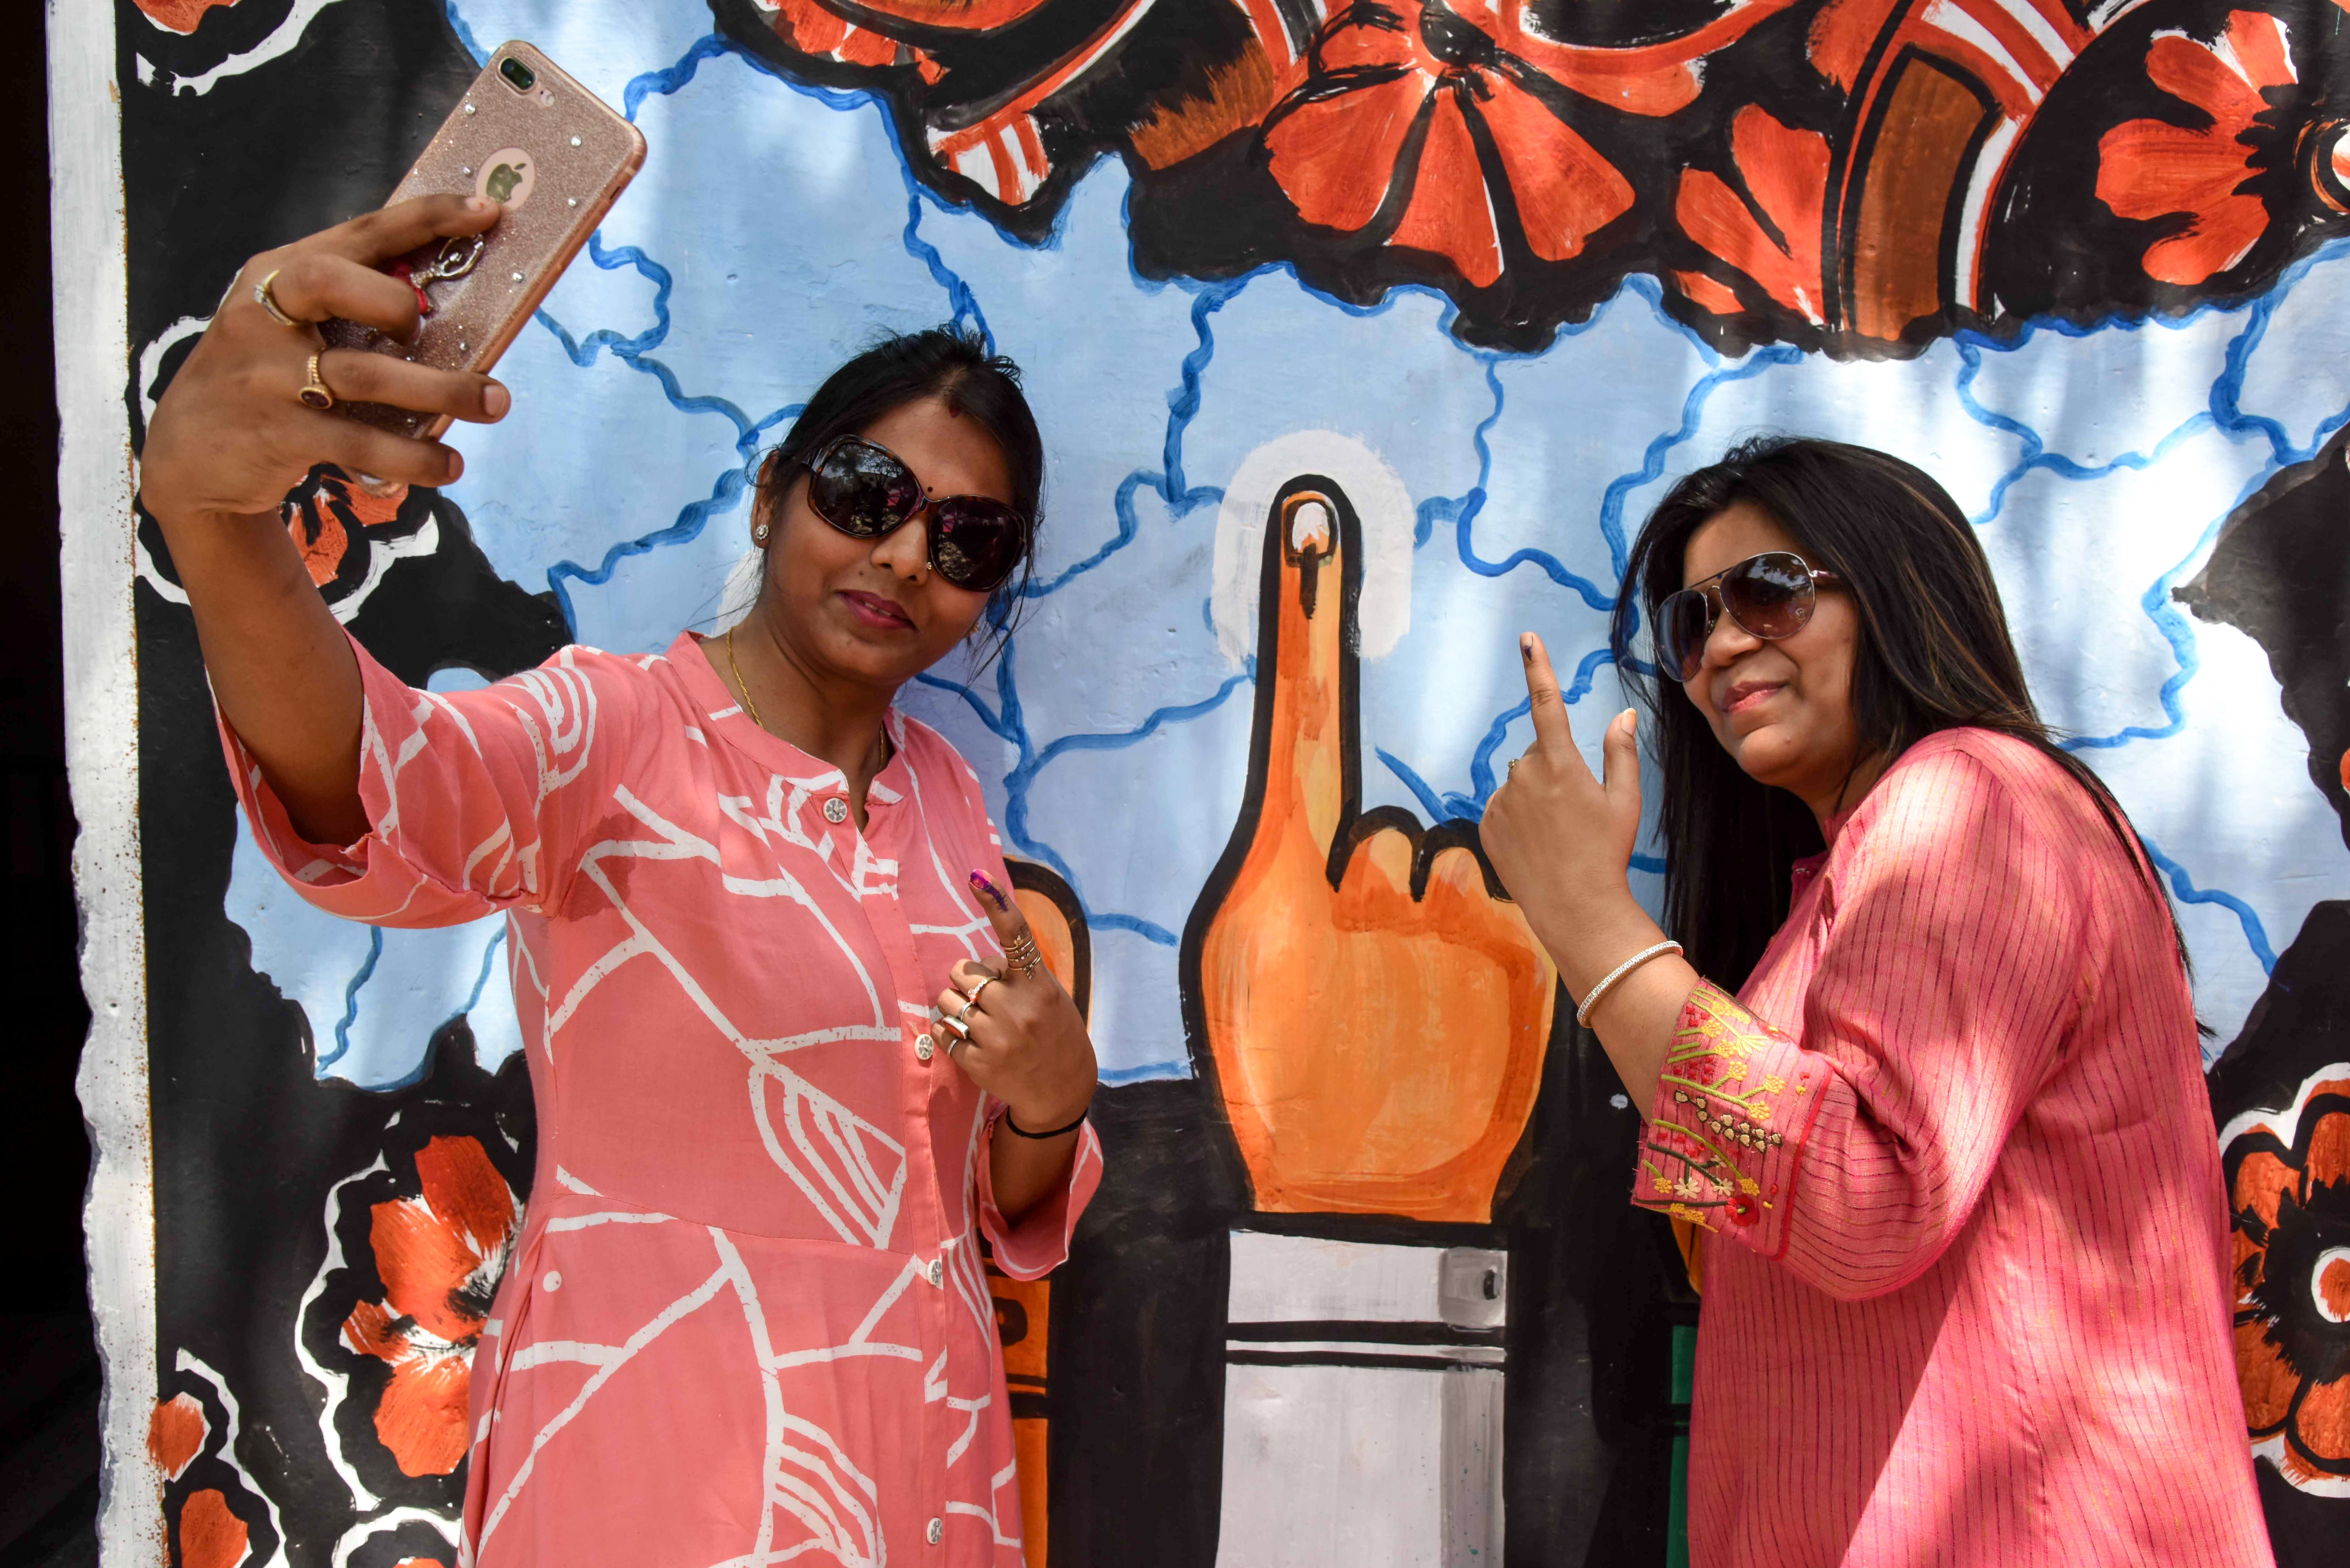 Indian voters take a selfie after casting their votes in Patna on May 19 2019. 